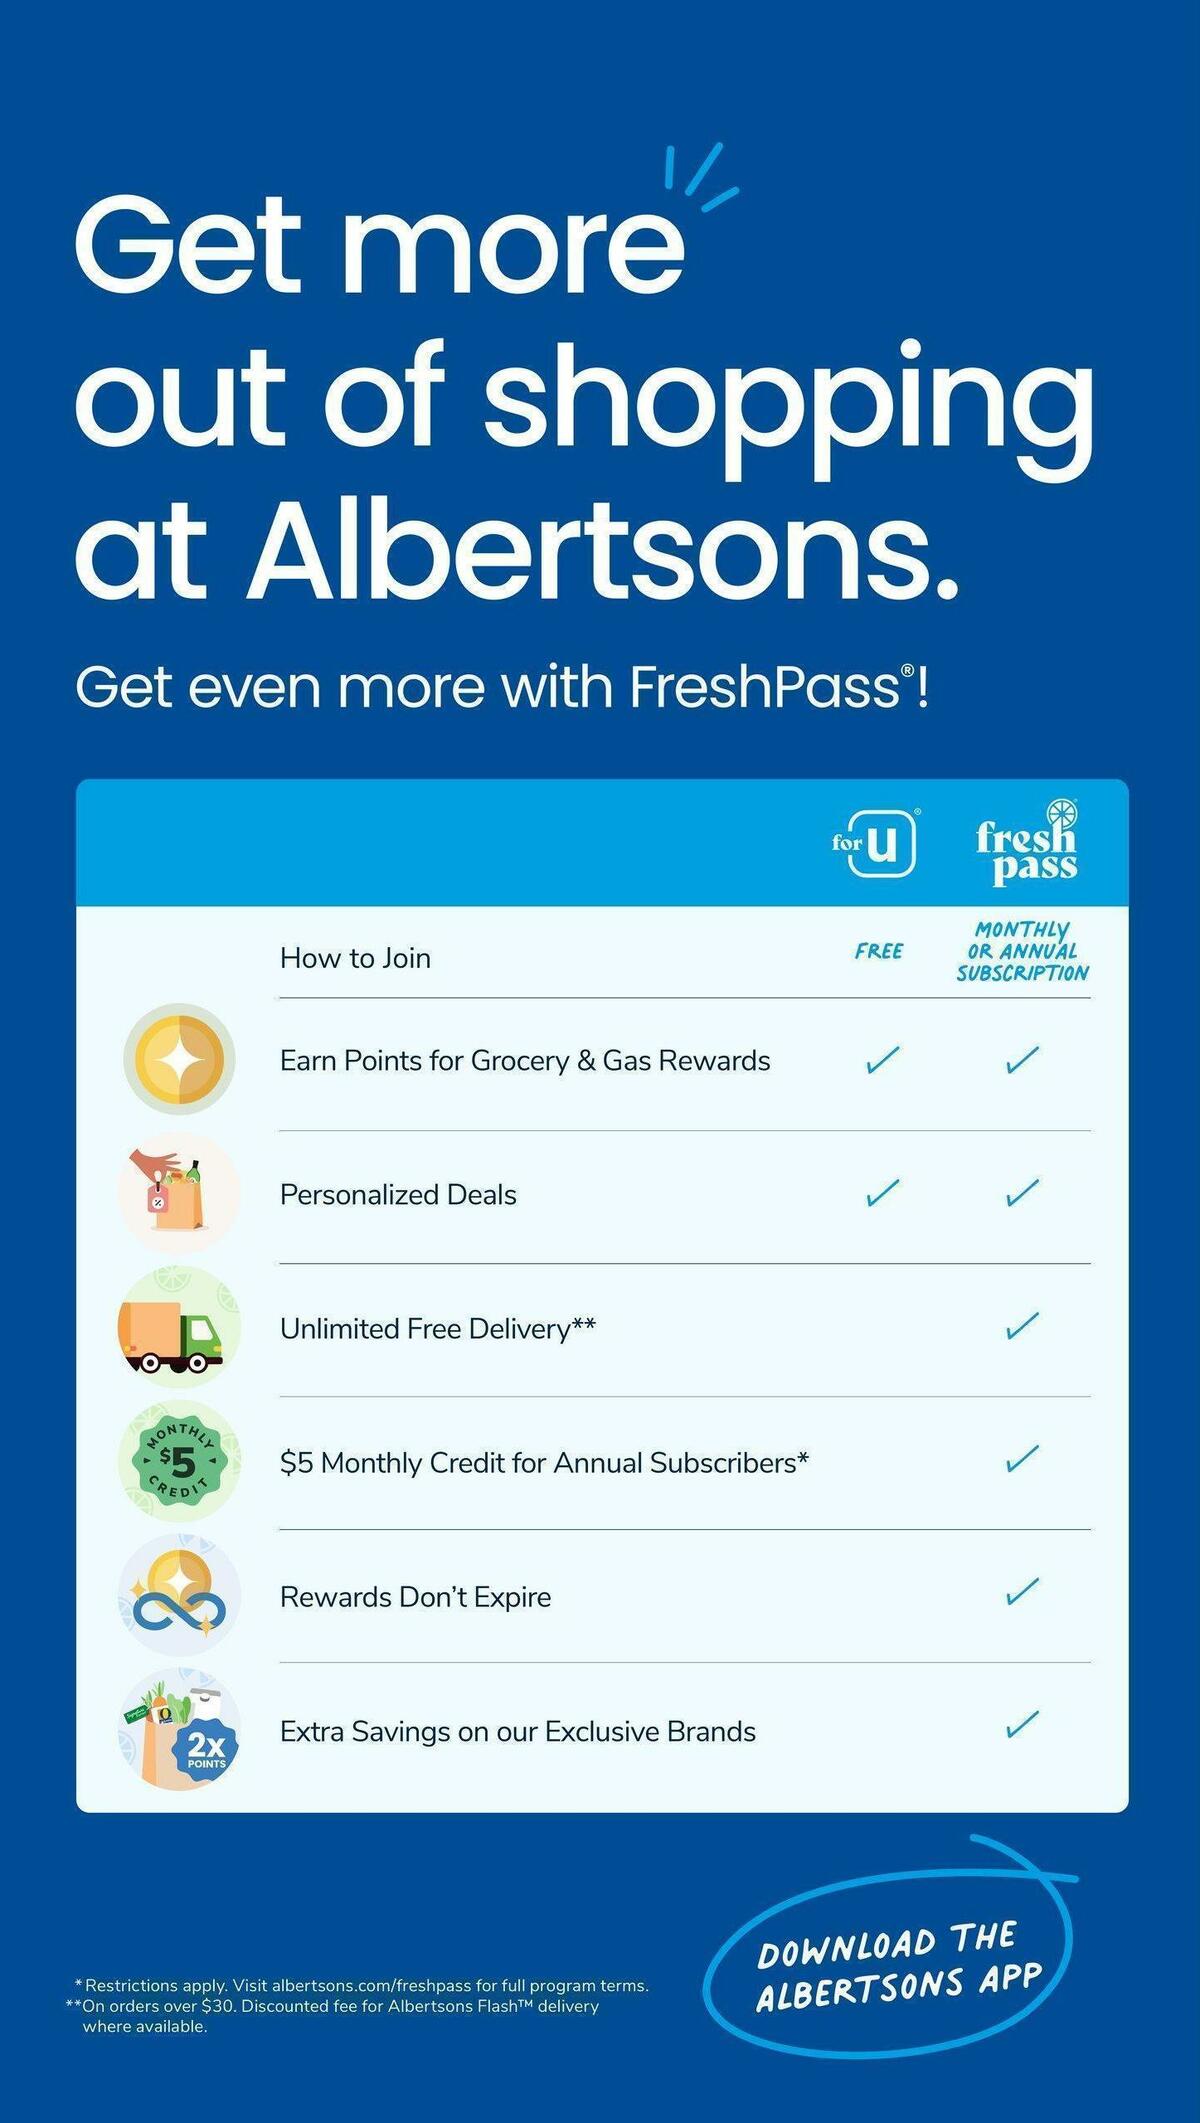 Albertsons Weekly Ad from May 17